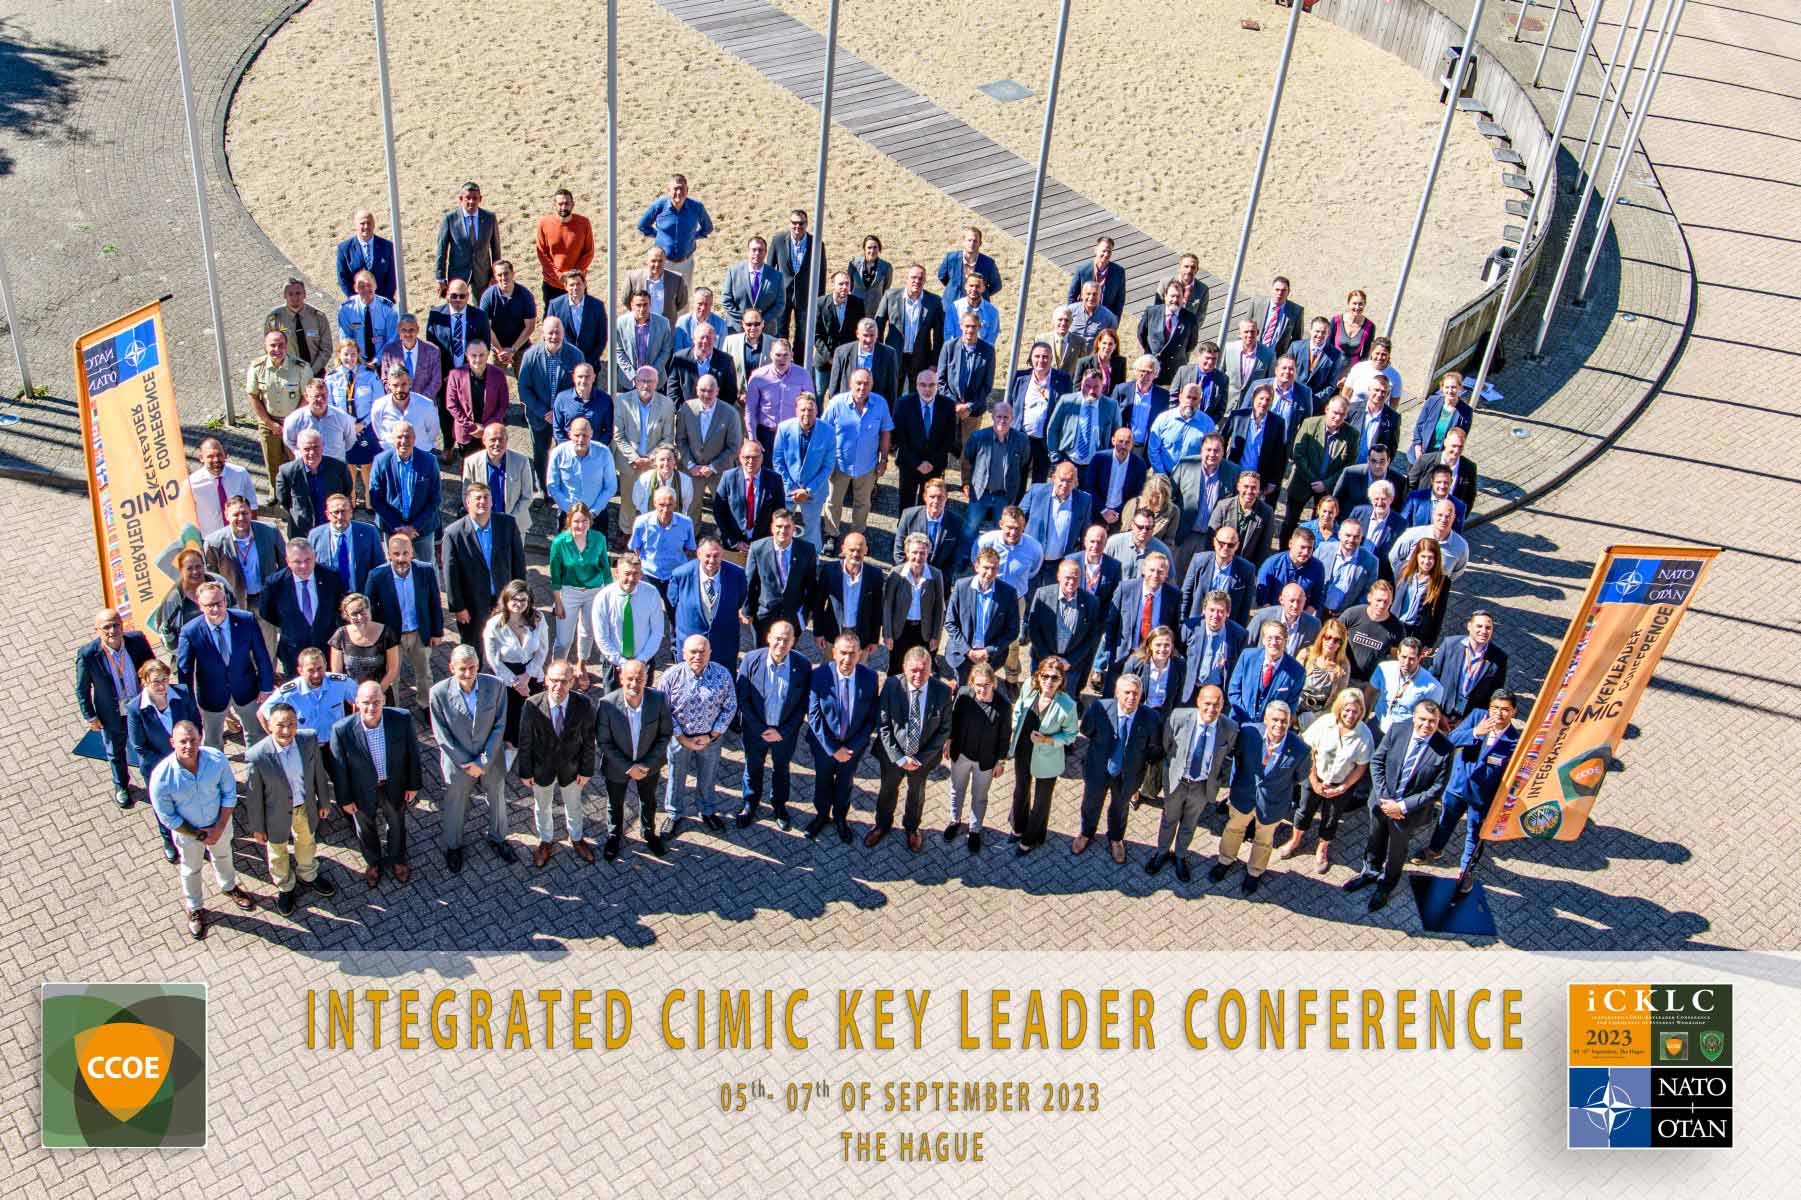 Icklc group conference